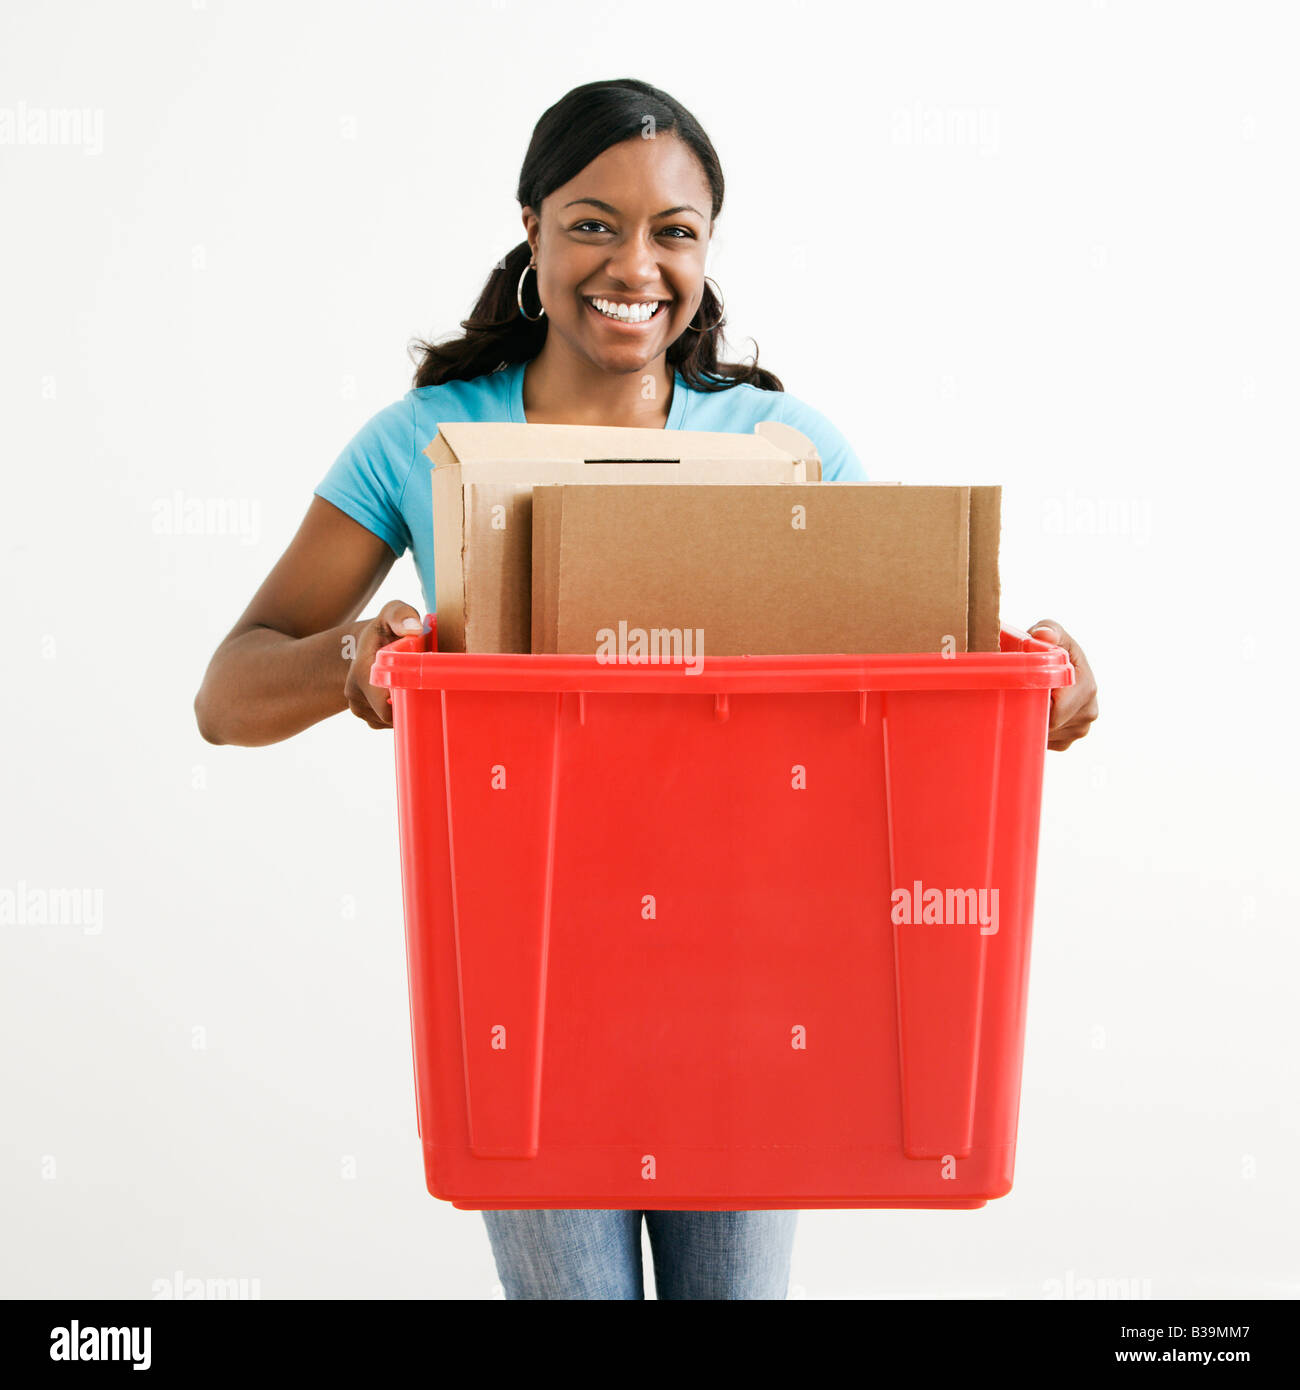 African American young adult female holding recycling bin avec du carton dans c Banque D'Images